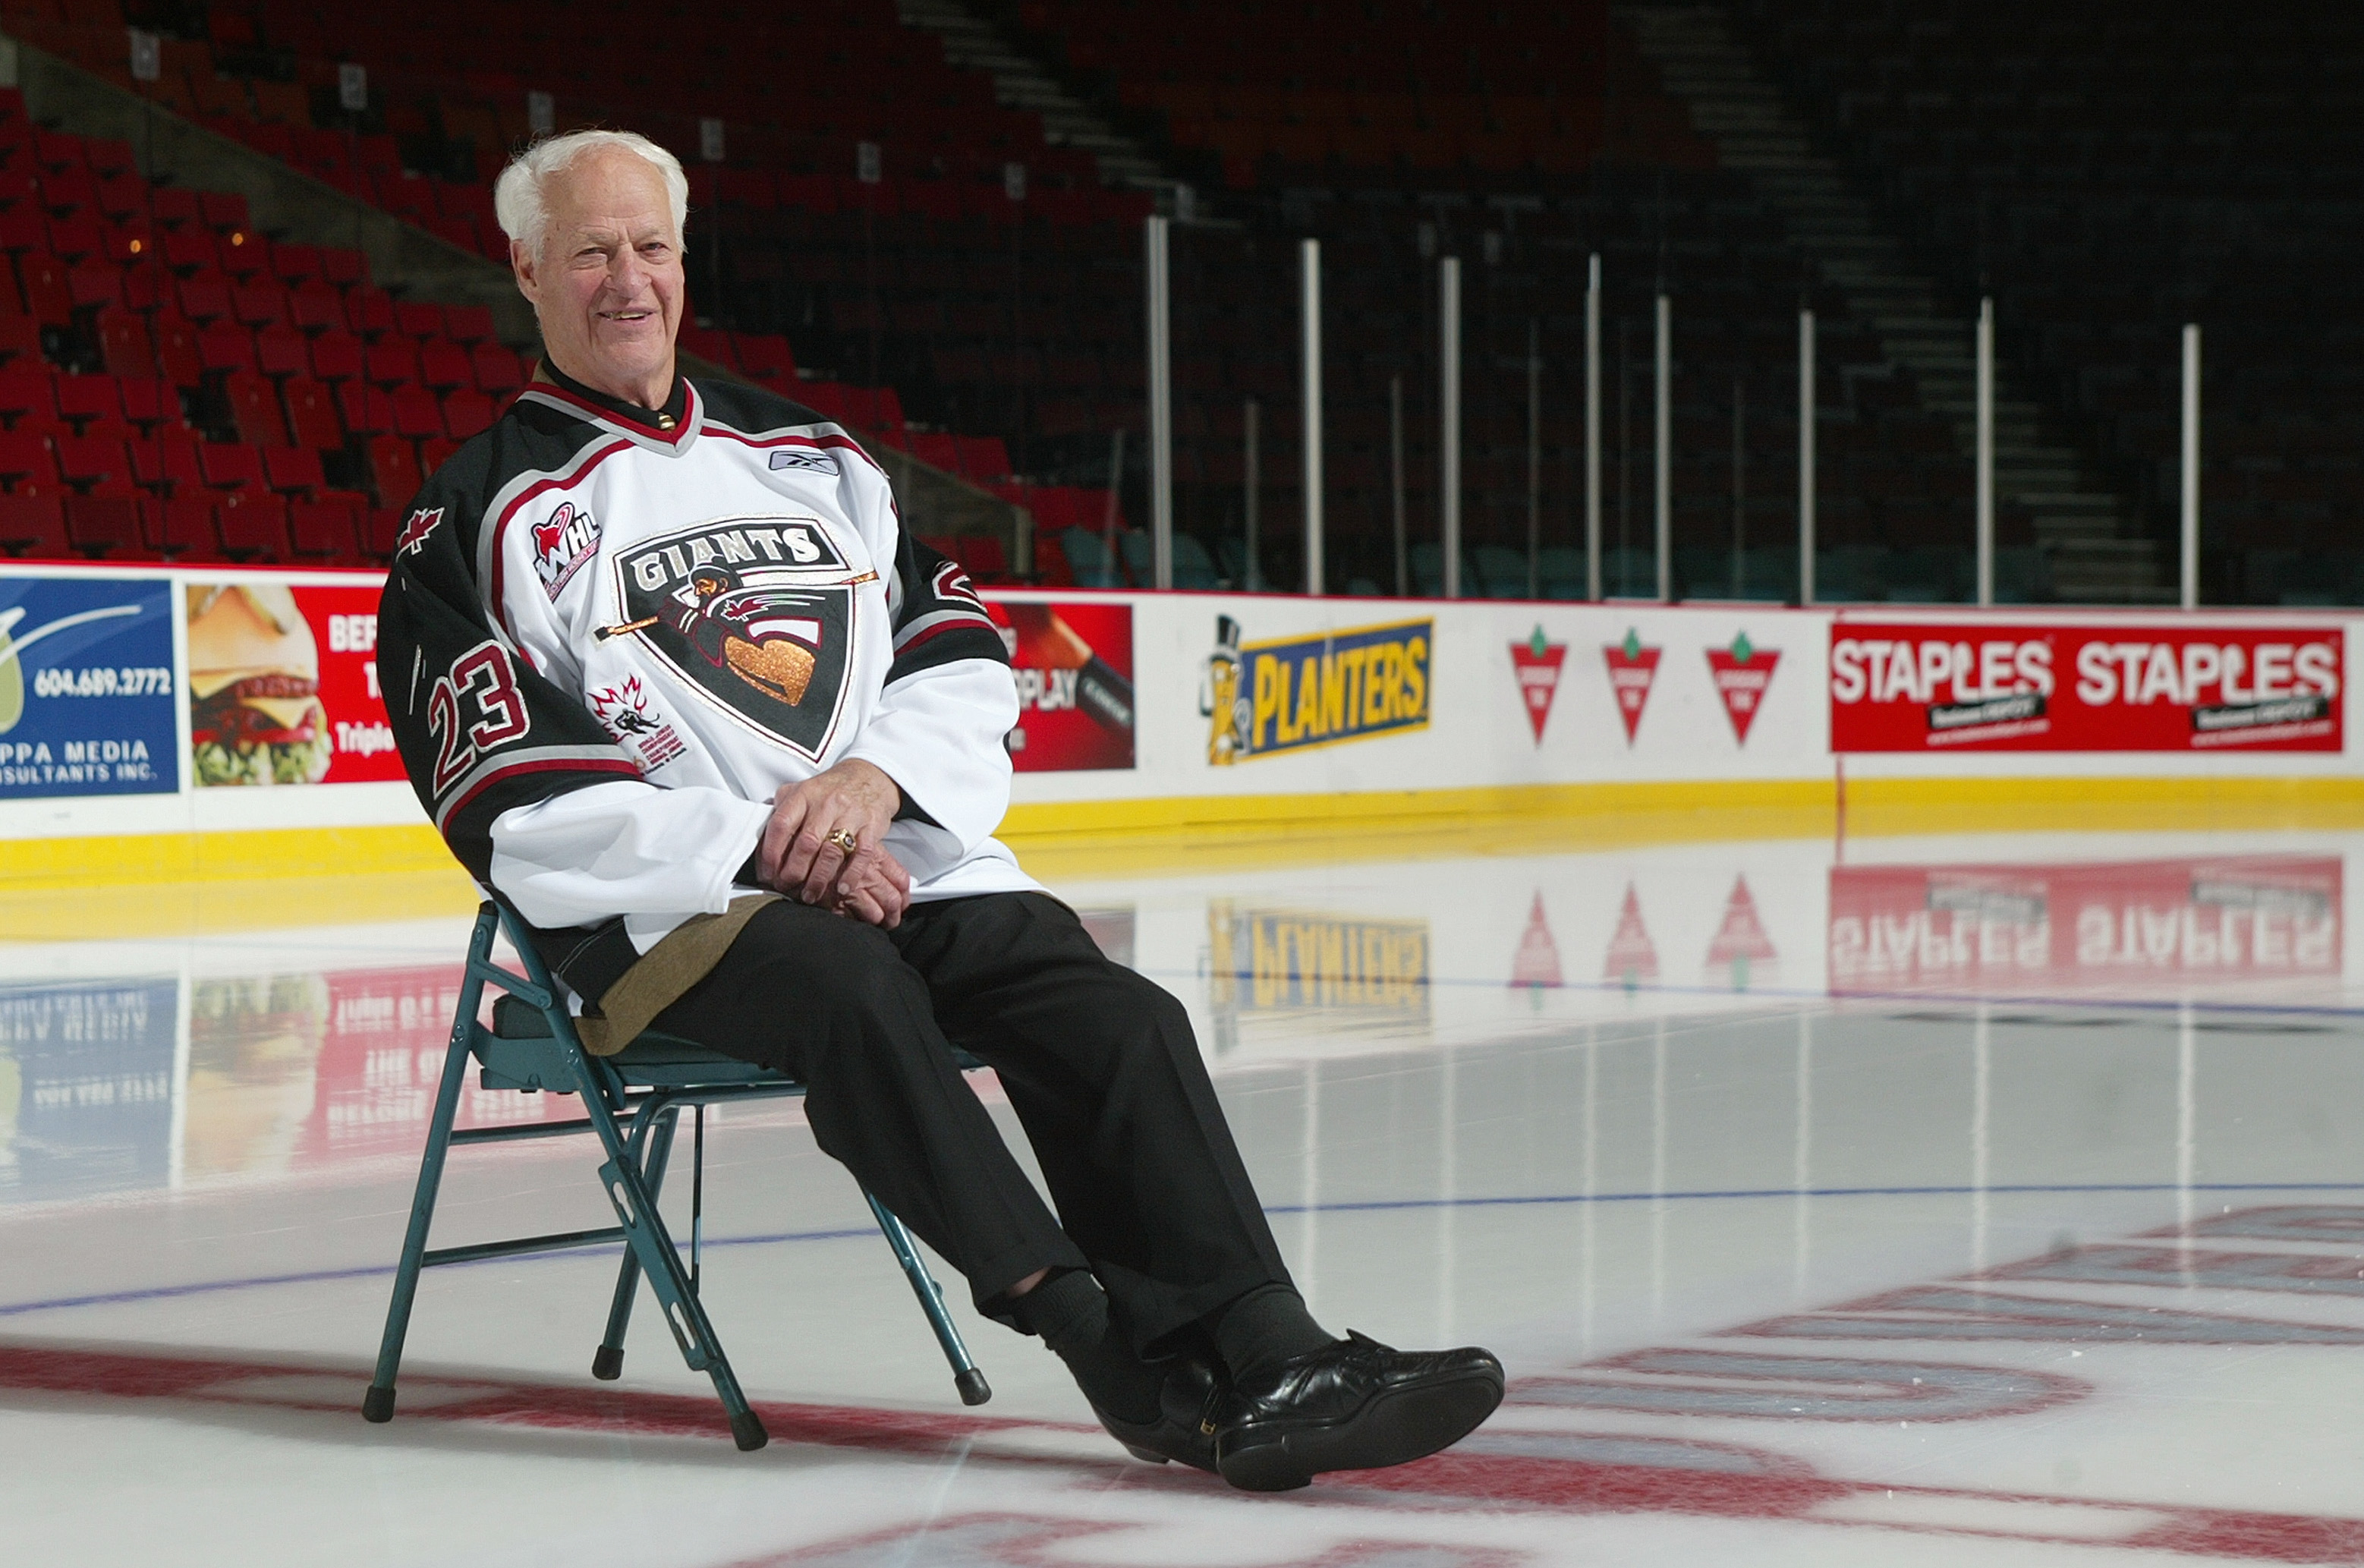 VANCOUVER, CANADA - OCTOBER 28:  Partial Owner of the Vancouver Giants Gordie Howe, aka 'Mr. Hockey, poses for a portrait during his visit for his annual inspection of the Vancouver Giants prior to their WHL game against the Everett Silvertips on October